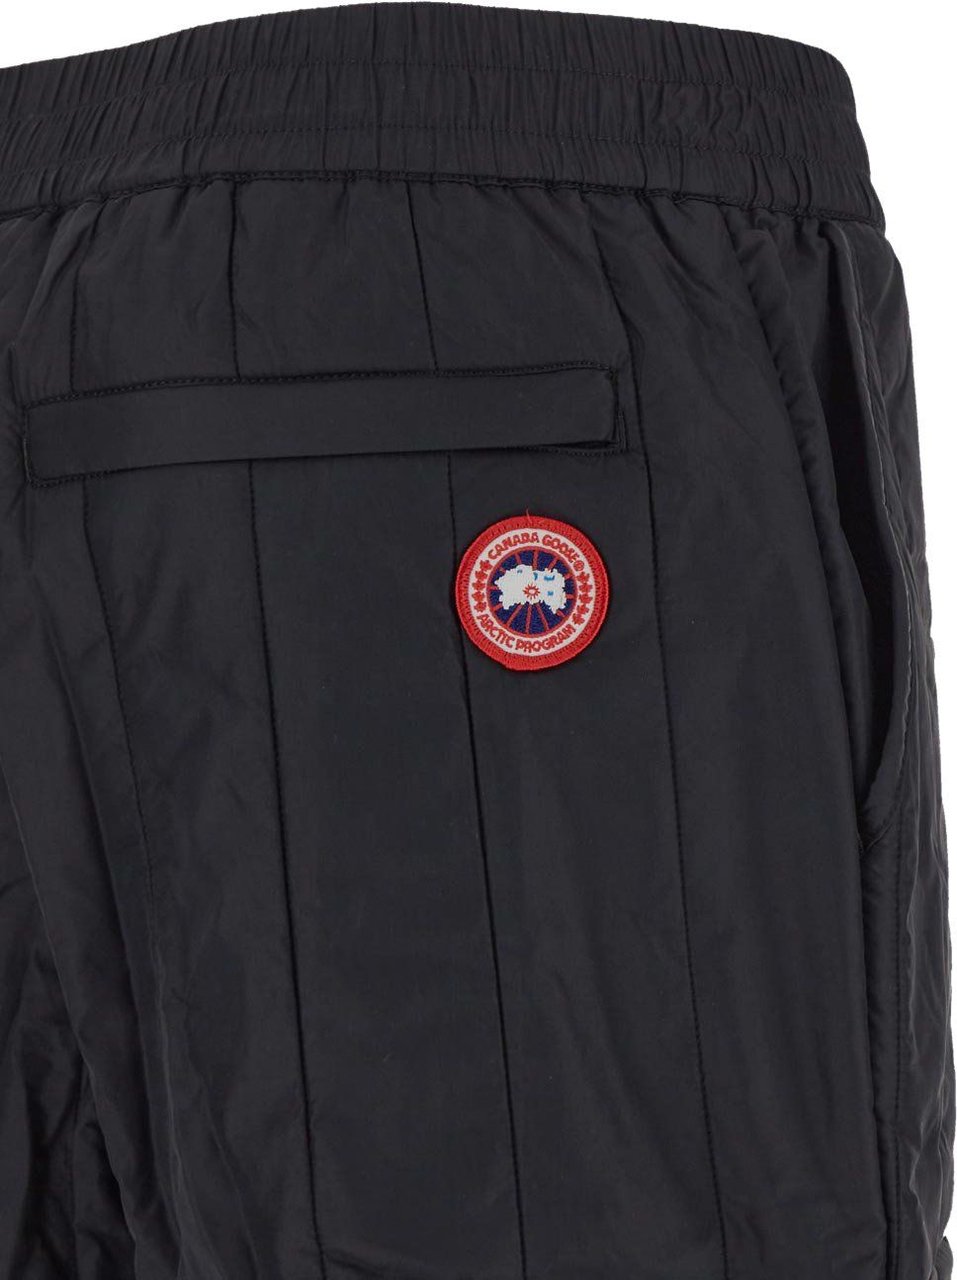 Canada Goose Carlyle Quilted Pant Zwart